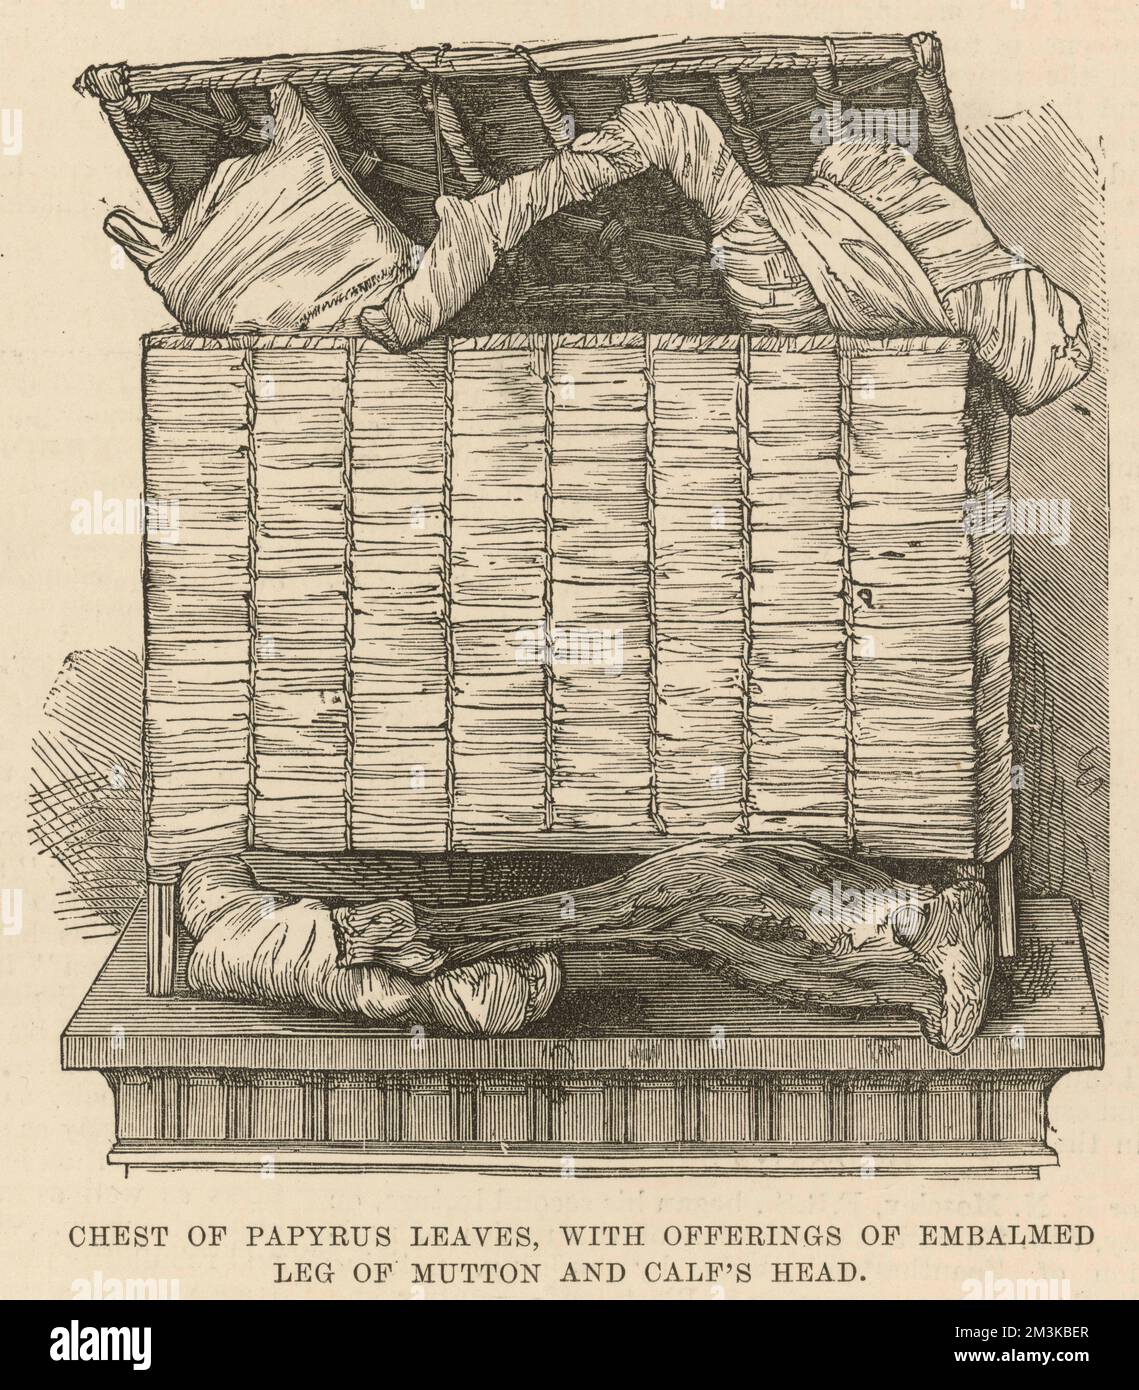 A chest made of papyrus leaves, with offerings of embalmed leg of mutton and calf's head, as discovered by Professor Maspero at Thebes in Upper Egypt, during his investigation in April 1881. Egyptologist Ameila Edwards described these artefacts in the accompanying article in the Illustrated London News, 'The large hamper, on being opened, proved to contain the funereal repast of Queen Isa-em-Kheb. This repast consisted of geese, legs of mutton and gazelle, calves' heads etc, all mummified and bandaged.'     Date: Ancient Egyptian (21st Dynasty ) Stock Photo